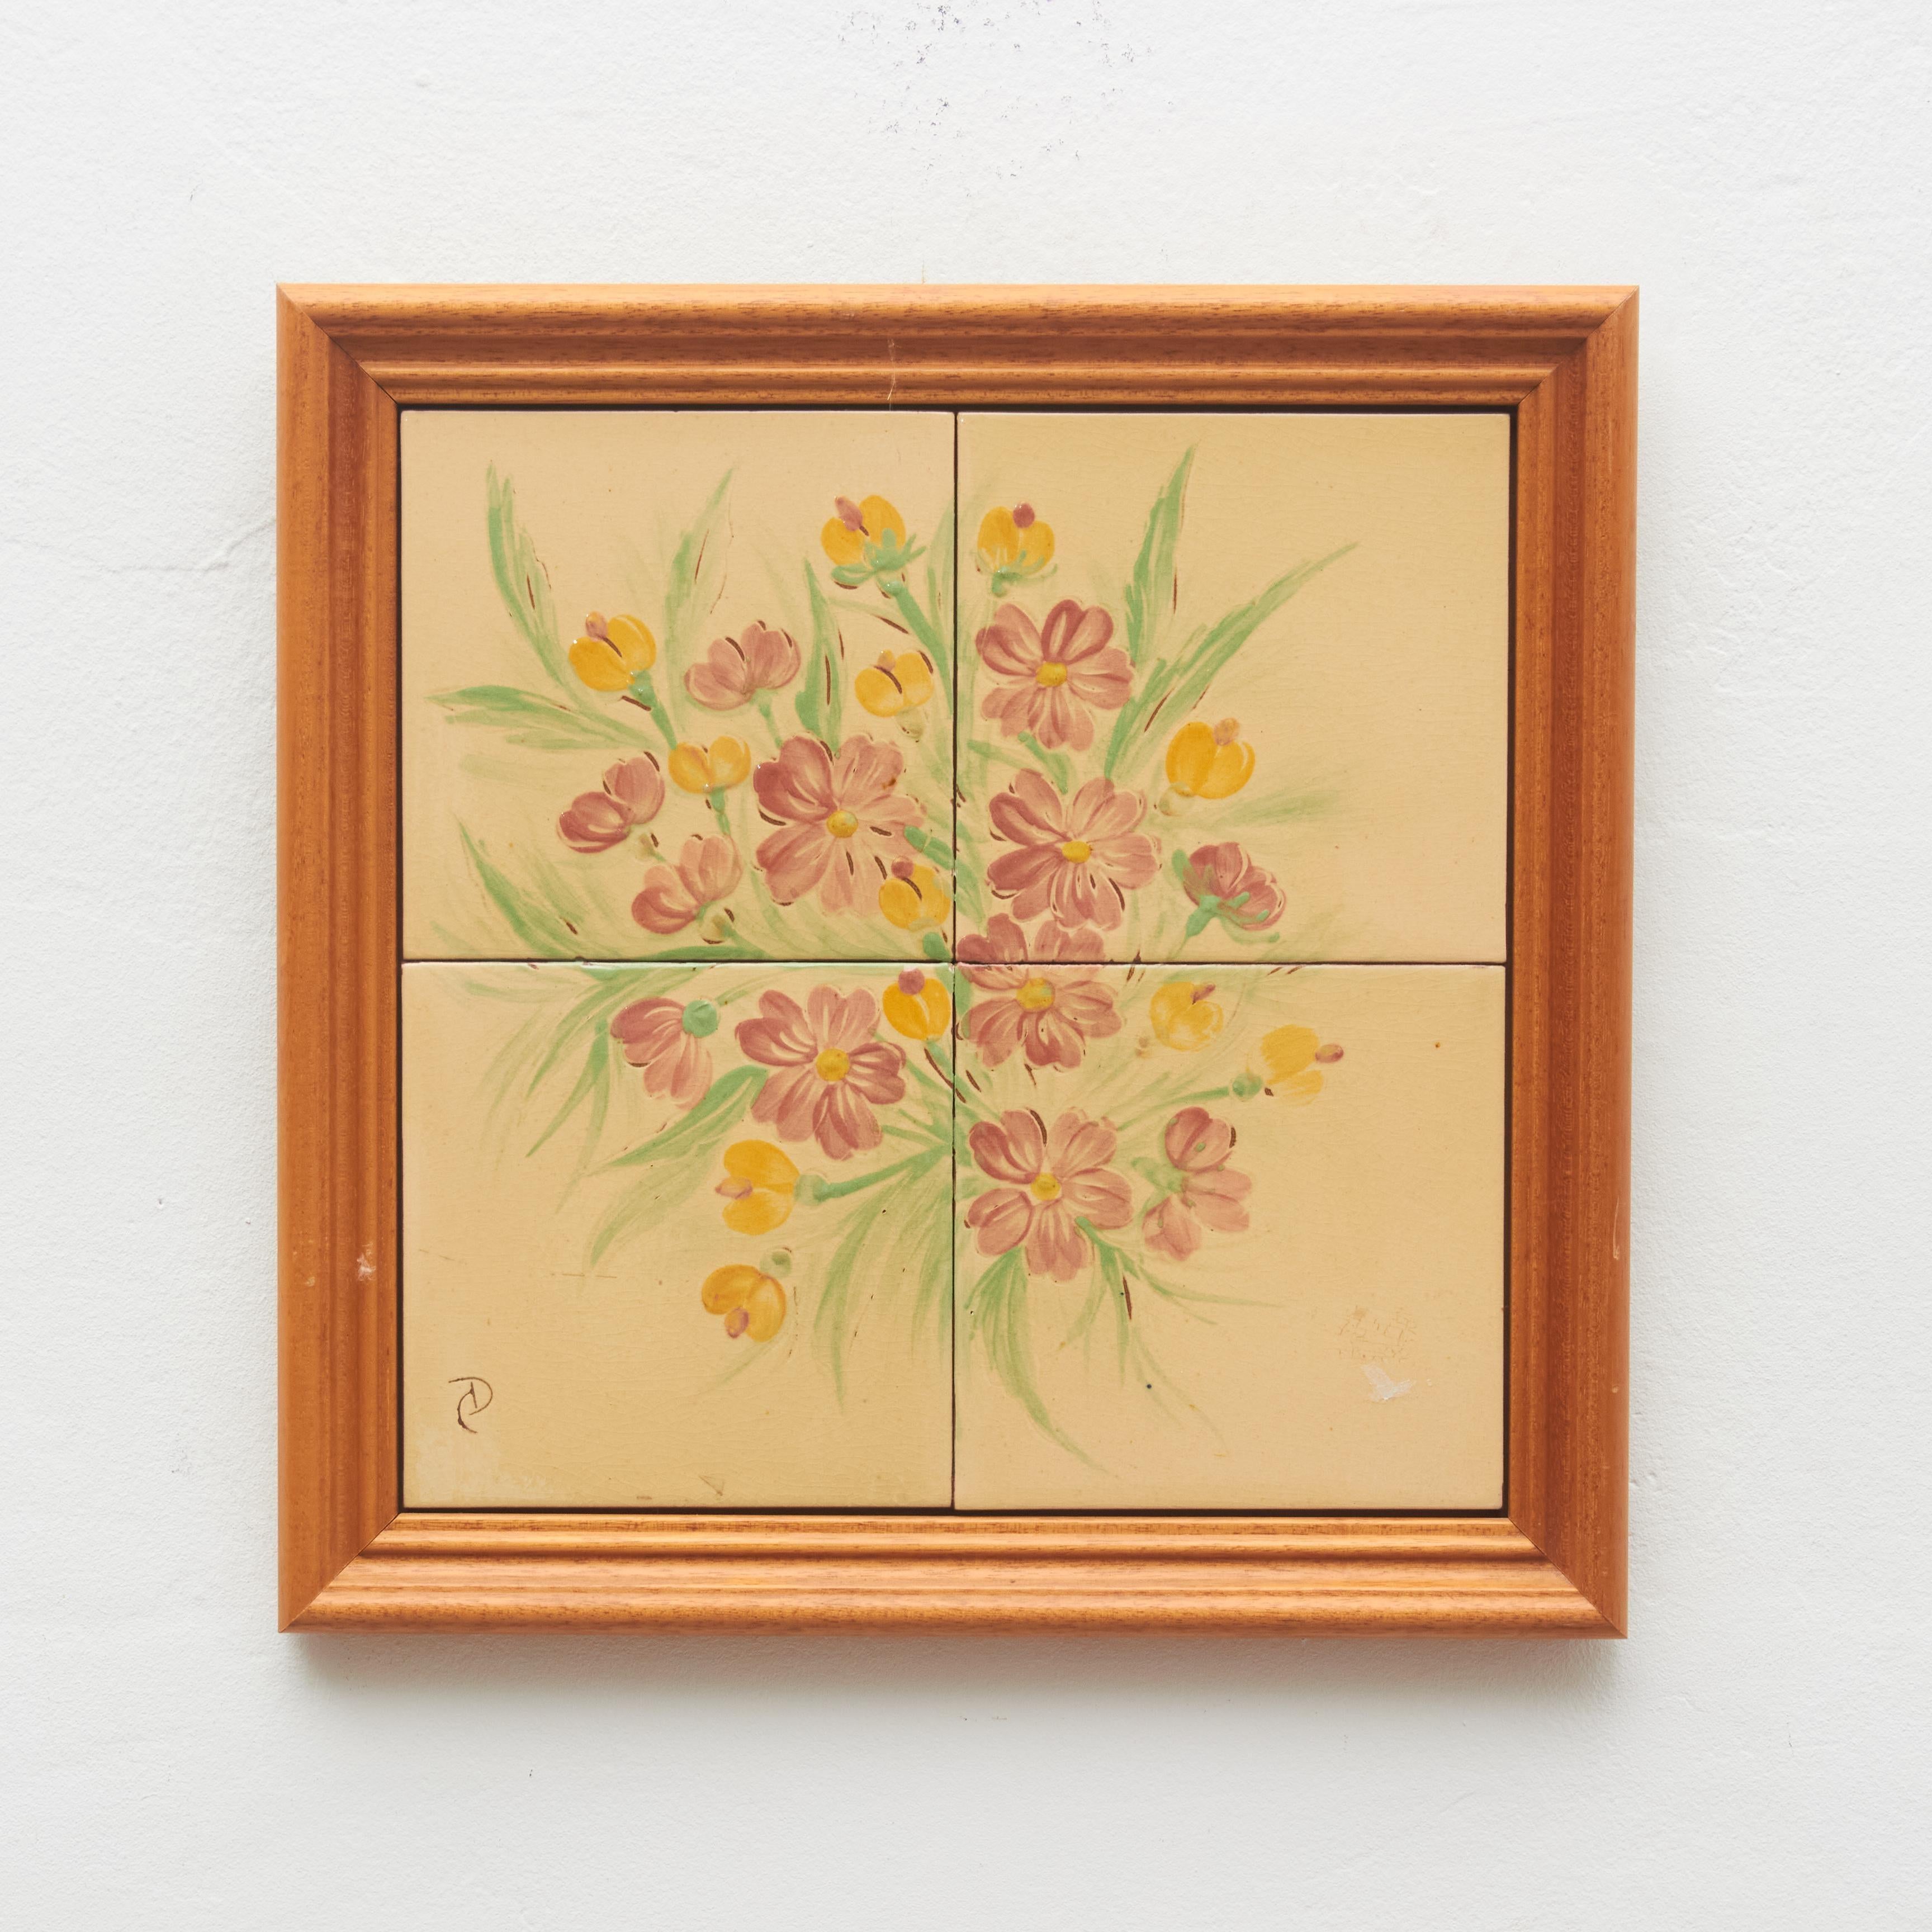 Ceramic hand painted artwork of a plant by Catalan artist Diaz Costa, circa 1960.
Framed. Signed.

In original condition, with minor wear consistent of age and use, preserving a beautiul patina.

Important information regarding color(s) of